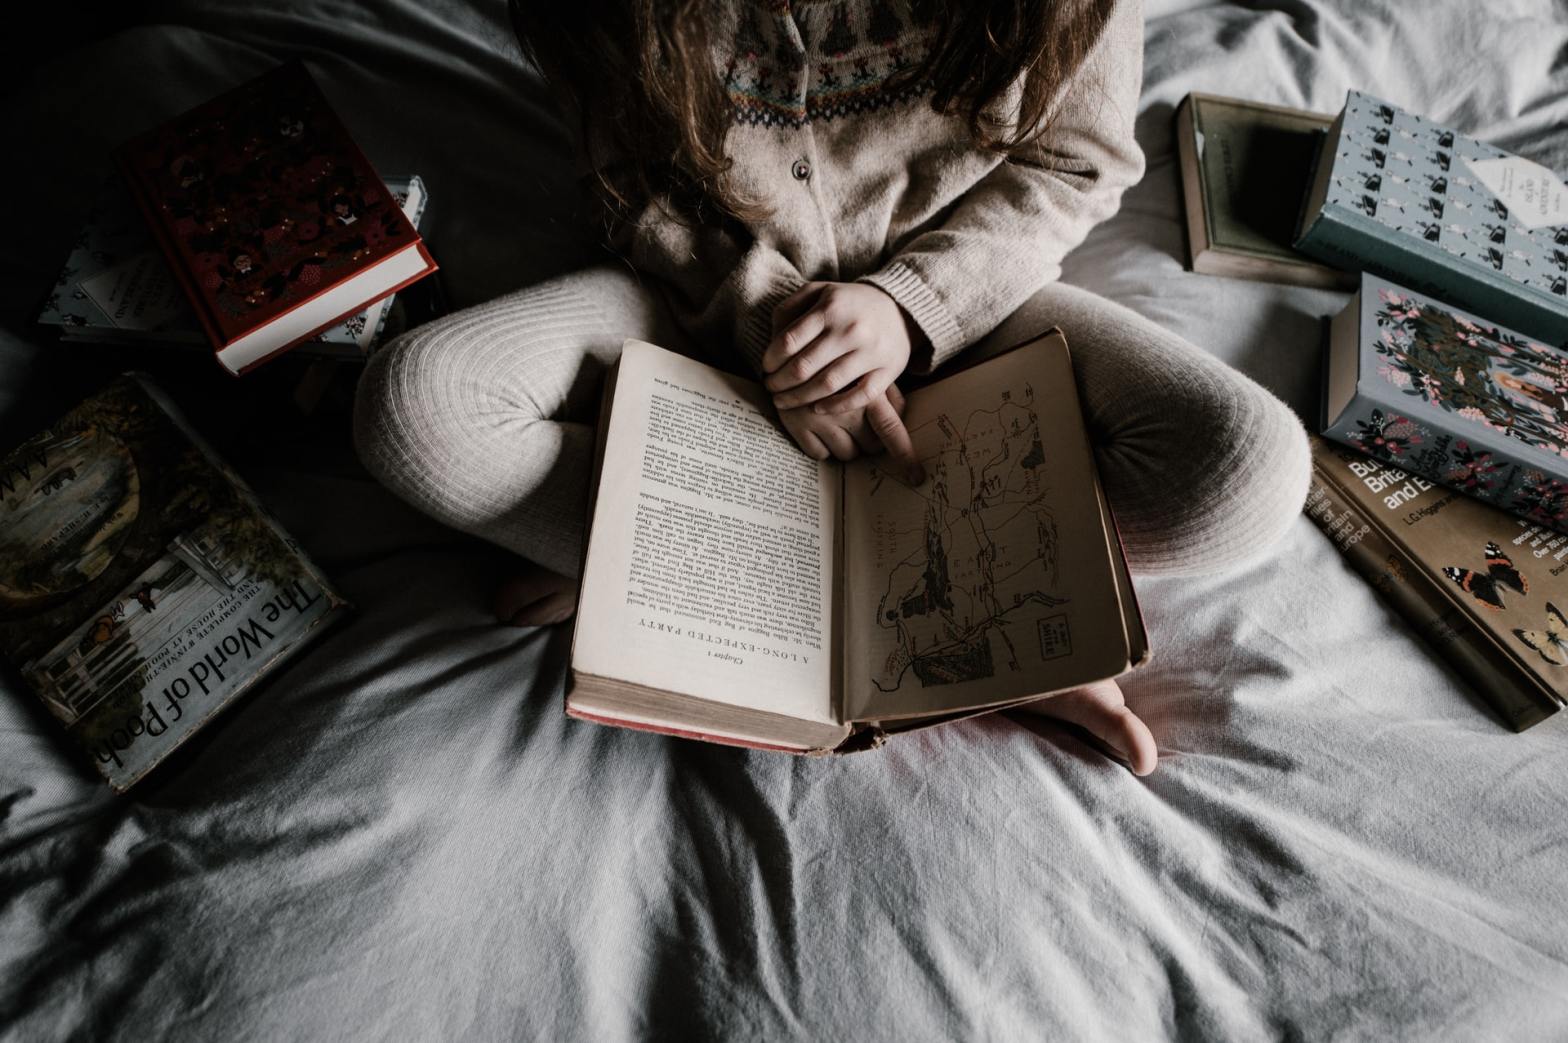 A girl sitting on a bed holding a book while being surrounded by other books